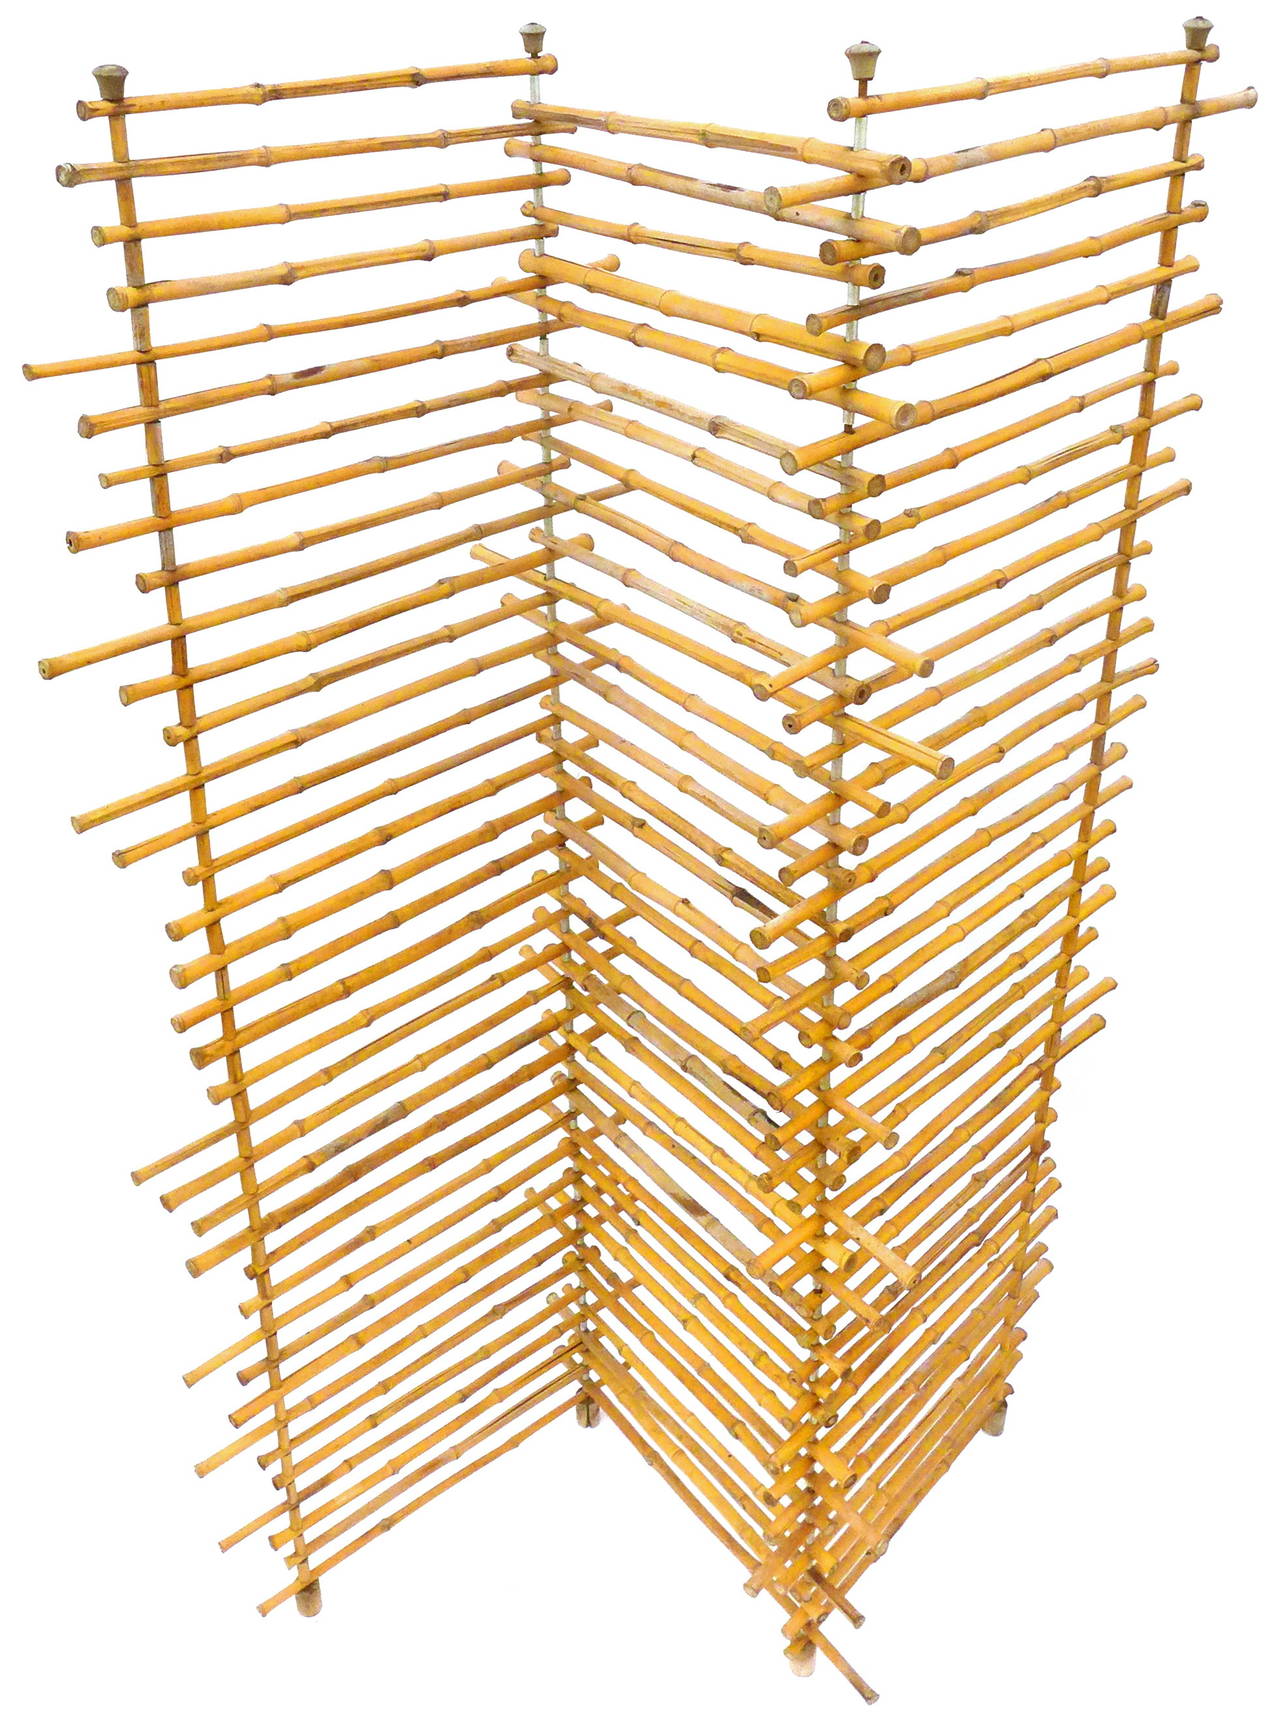 A fantastic three-paneled, adjustable, bamboo screen. A likely handmade piece featuring bamboo stalks of interestingly varied length and wood caps or feet.  A wonderful decorative accessory for delineating environments without being overly